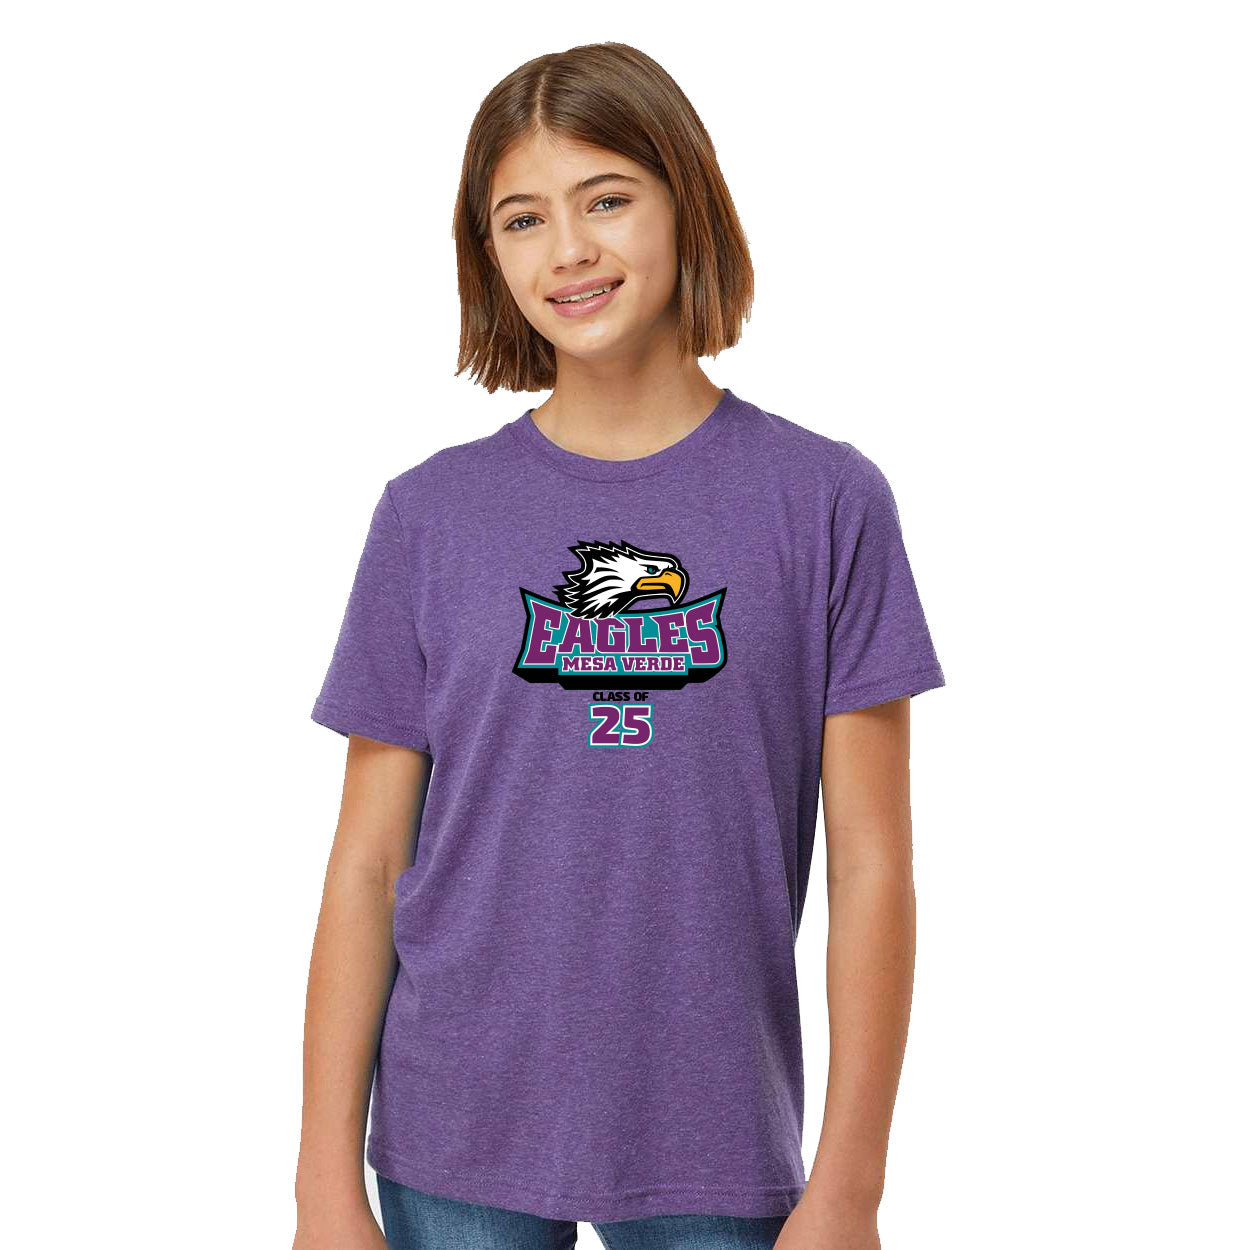 MESA VERDE CLASS OF 25 YOUTH POLY-RICH T-SHIRT